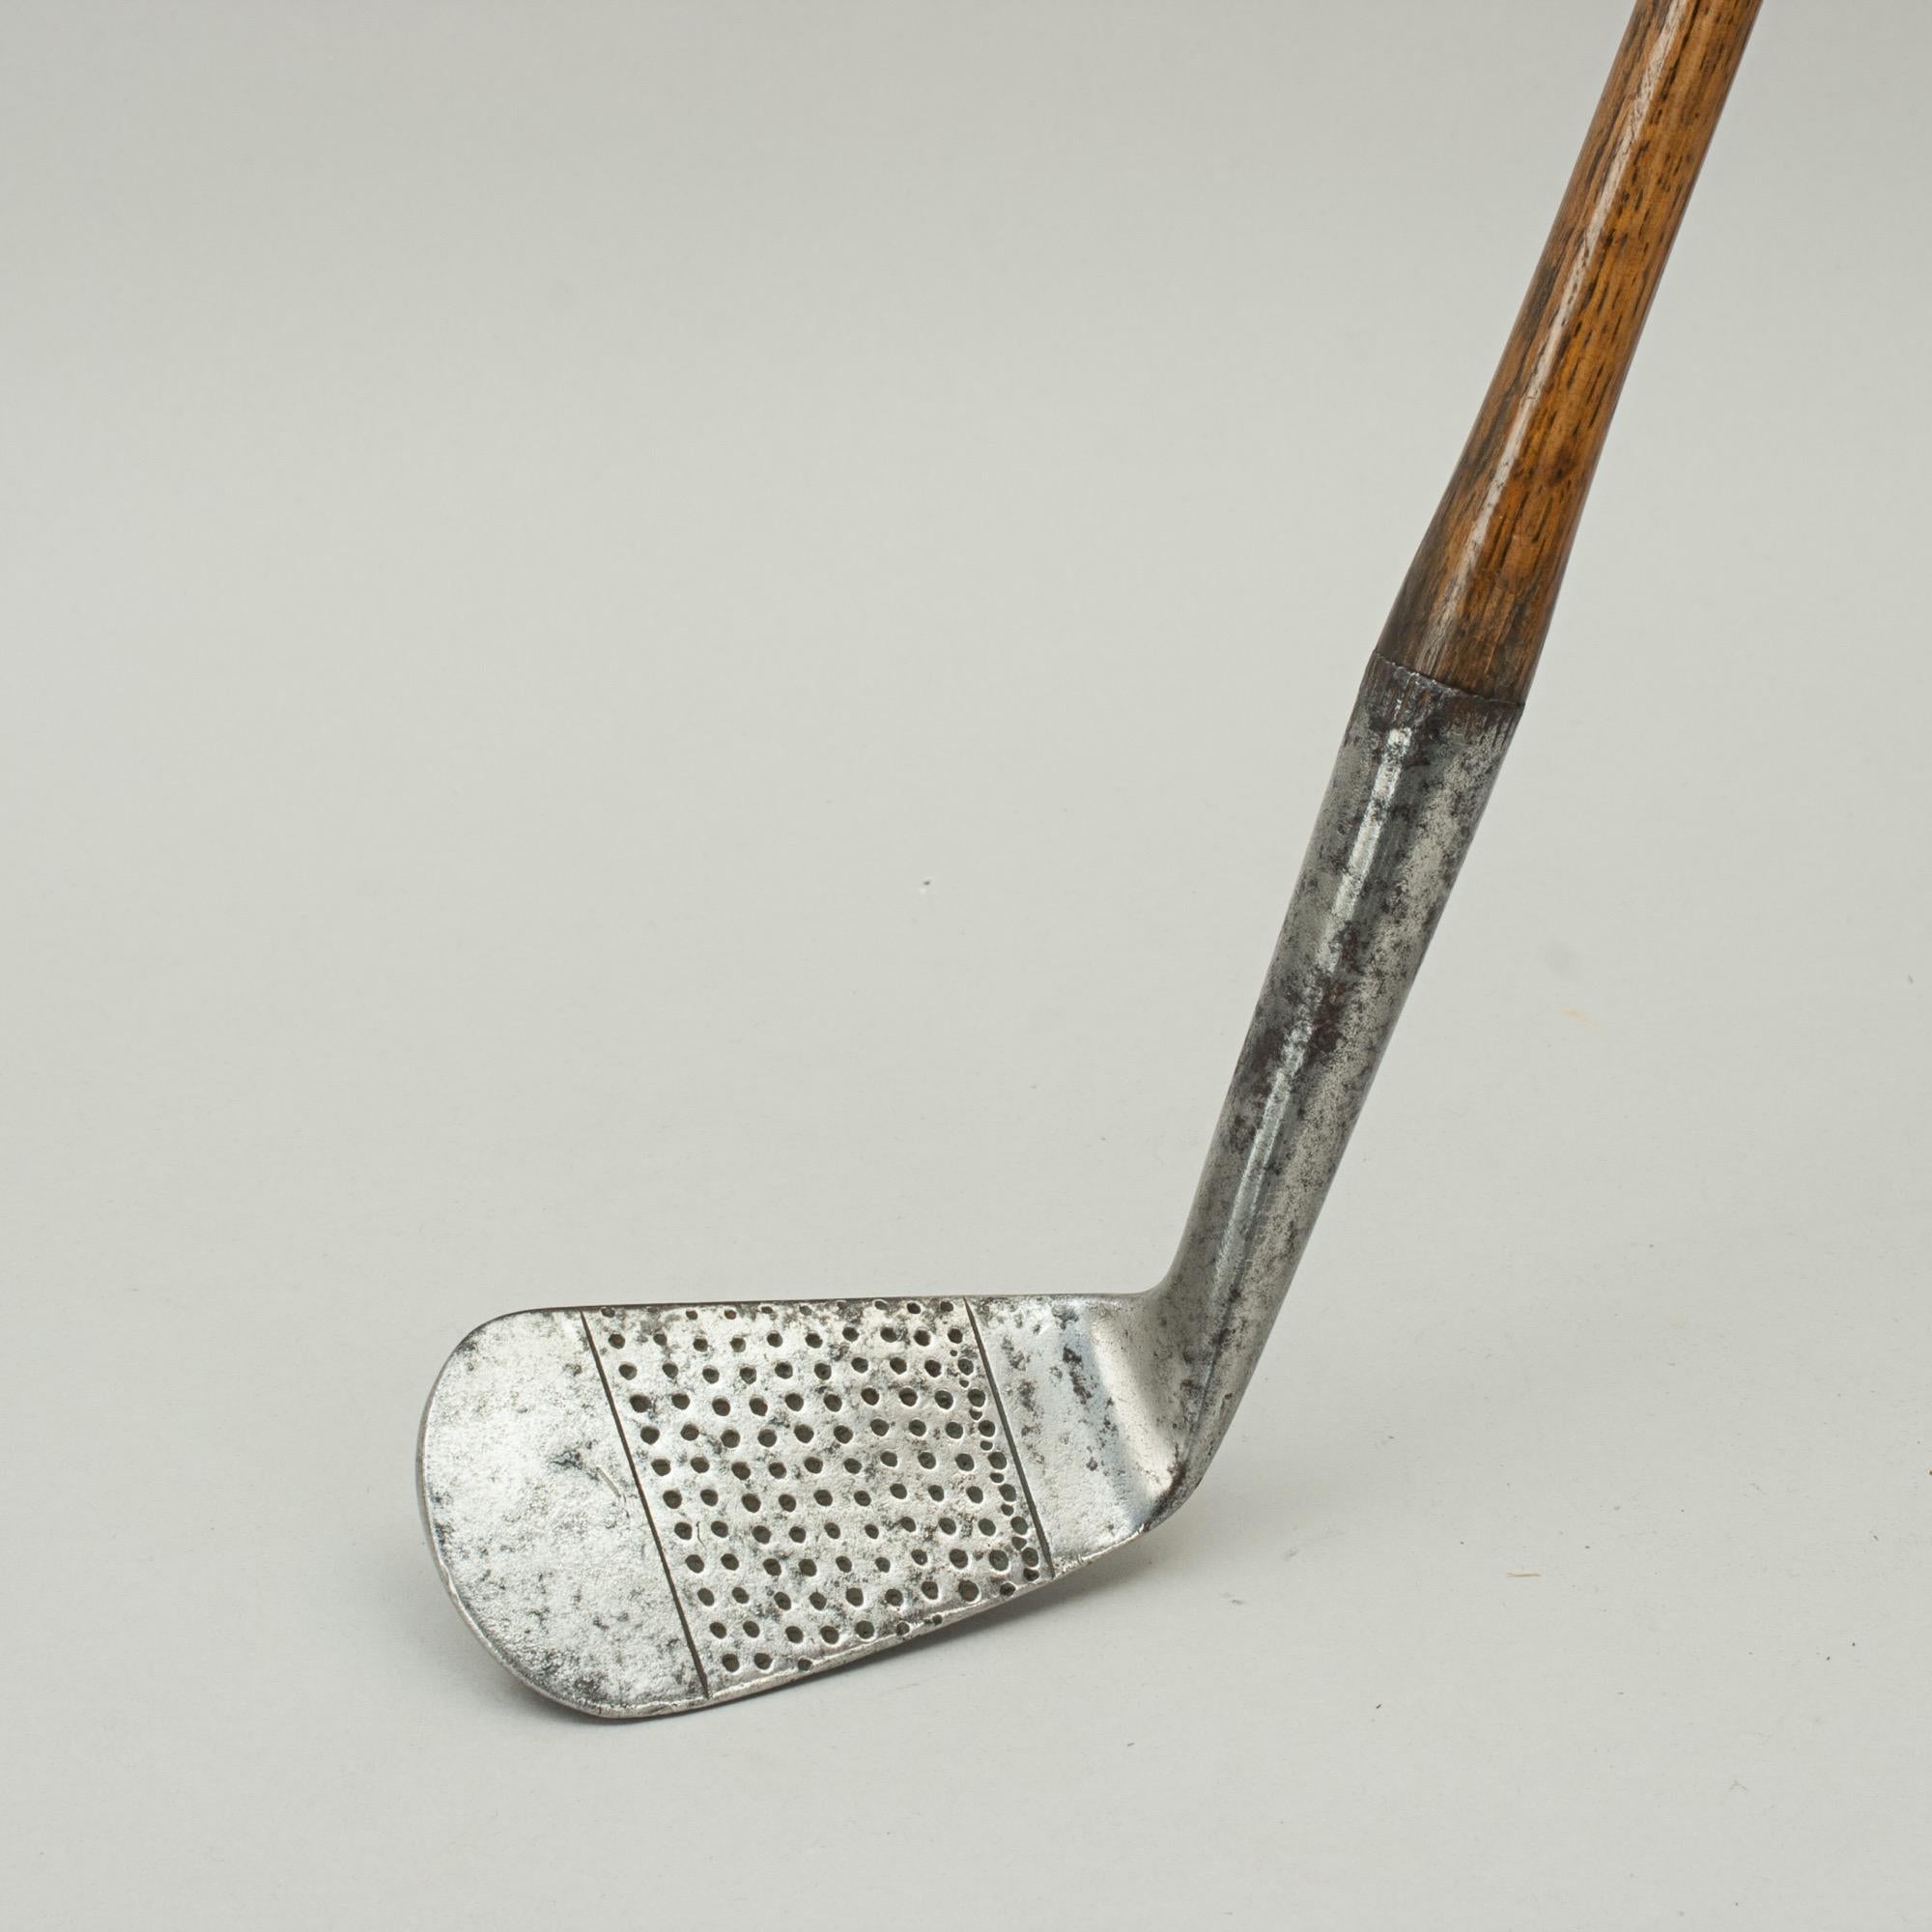 British Antique Hickory Golf Club, Tom Stewart Iron with Personal Inspection Mark